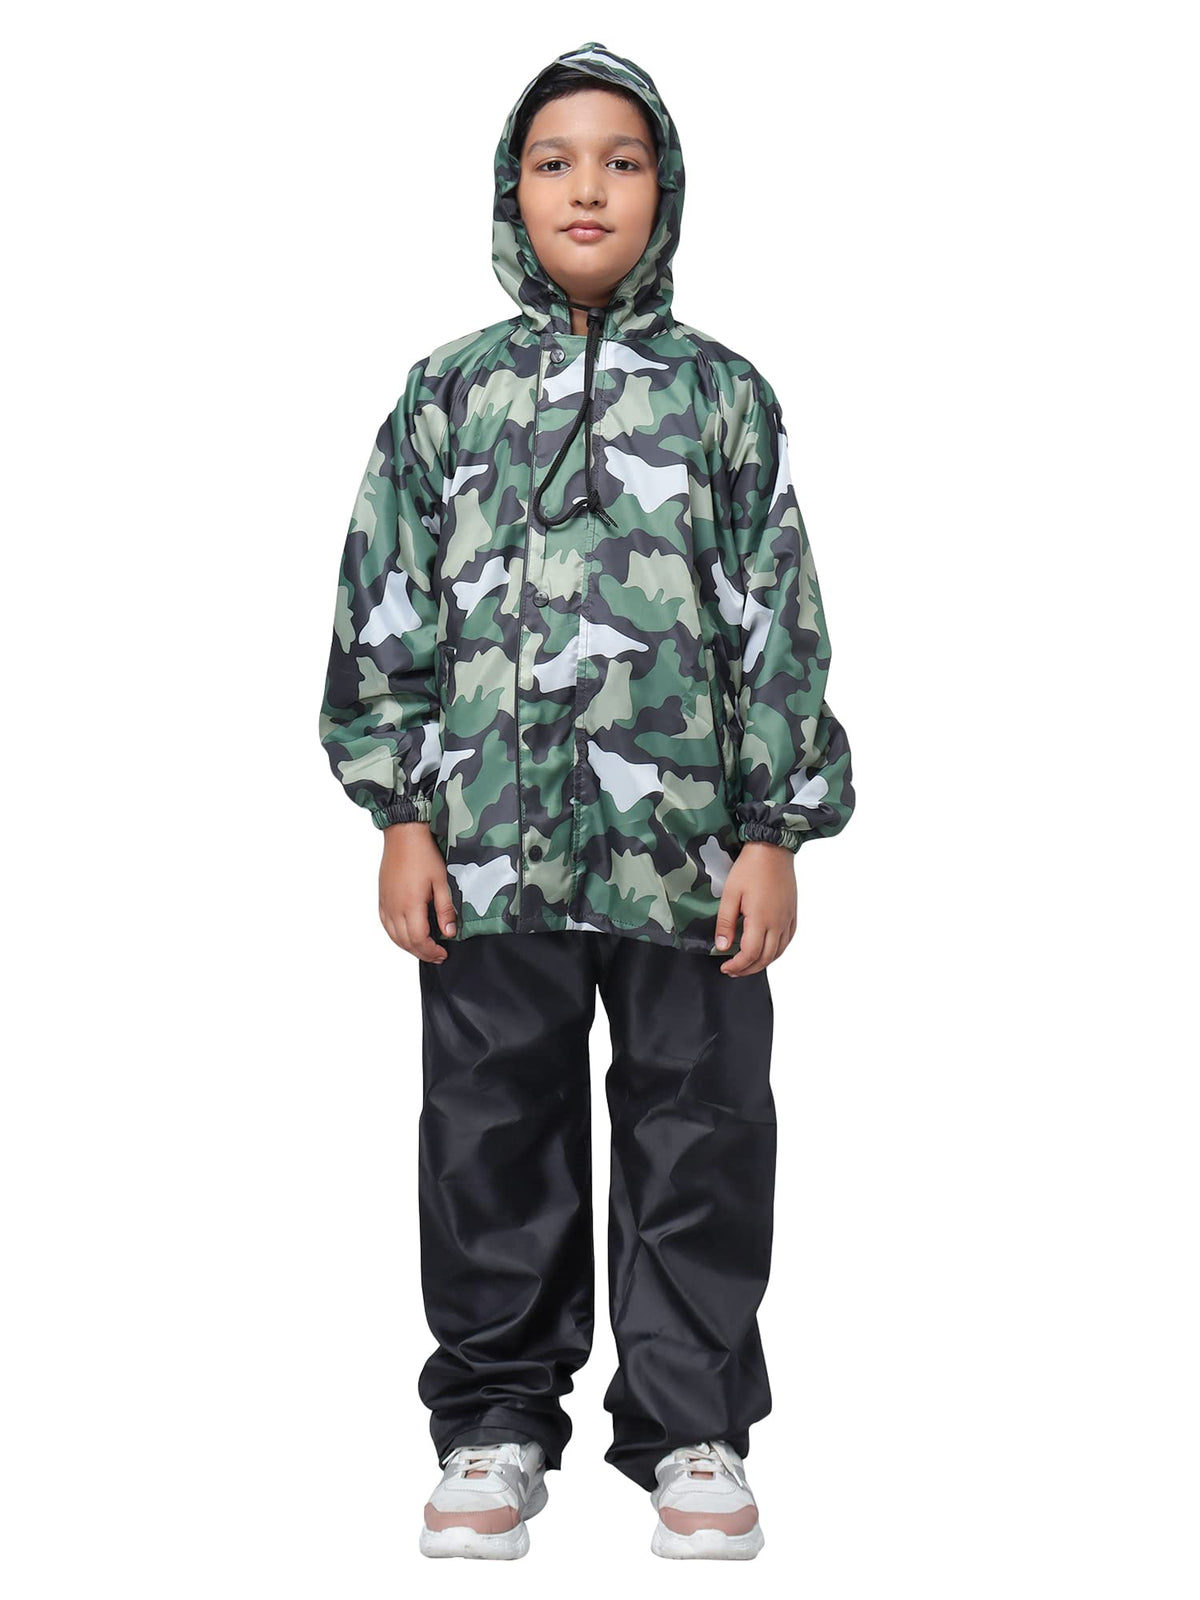 STRAUSS THE CLOWNFISH Comrad Series Kid's Waterproof Nylon Double Coating Reversible Raincoat with Hood and Reflector Logo at Back. Set of Top&Bottom. Printed Pouch Age-8-10 years (Green Camo)